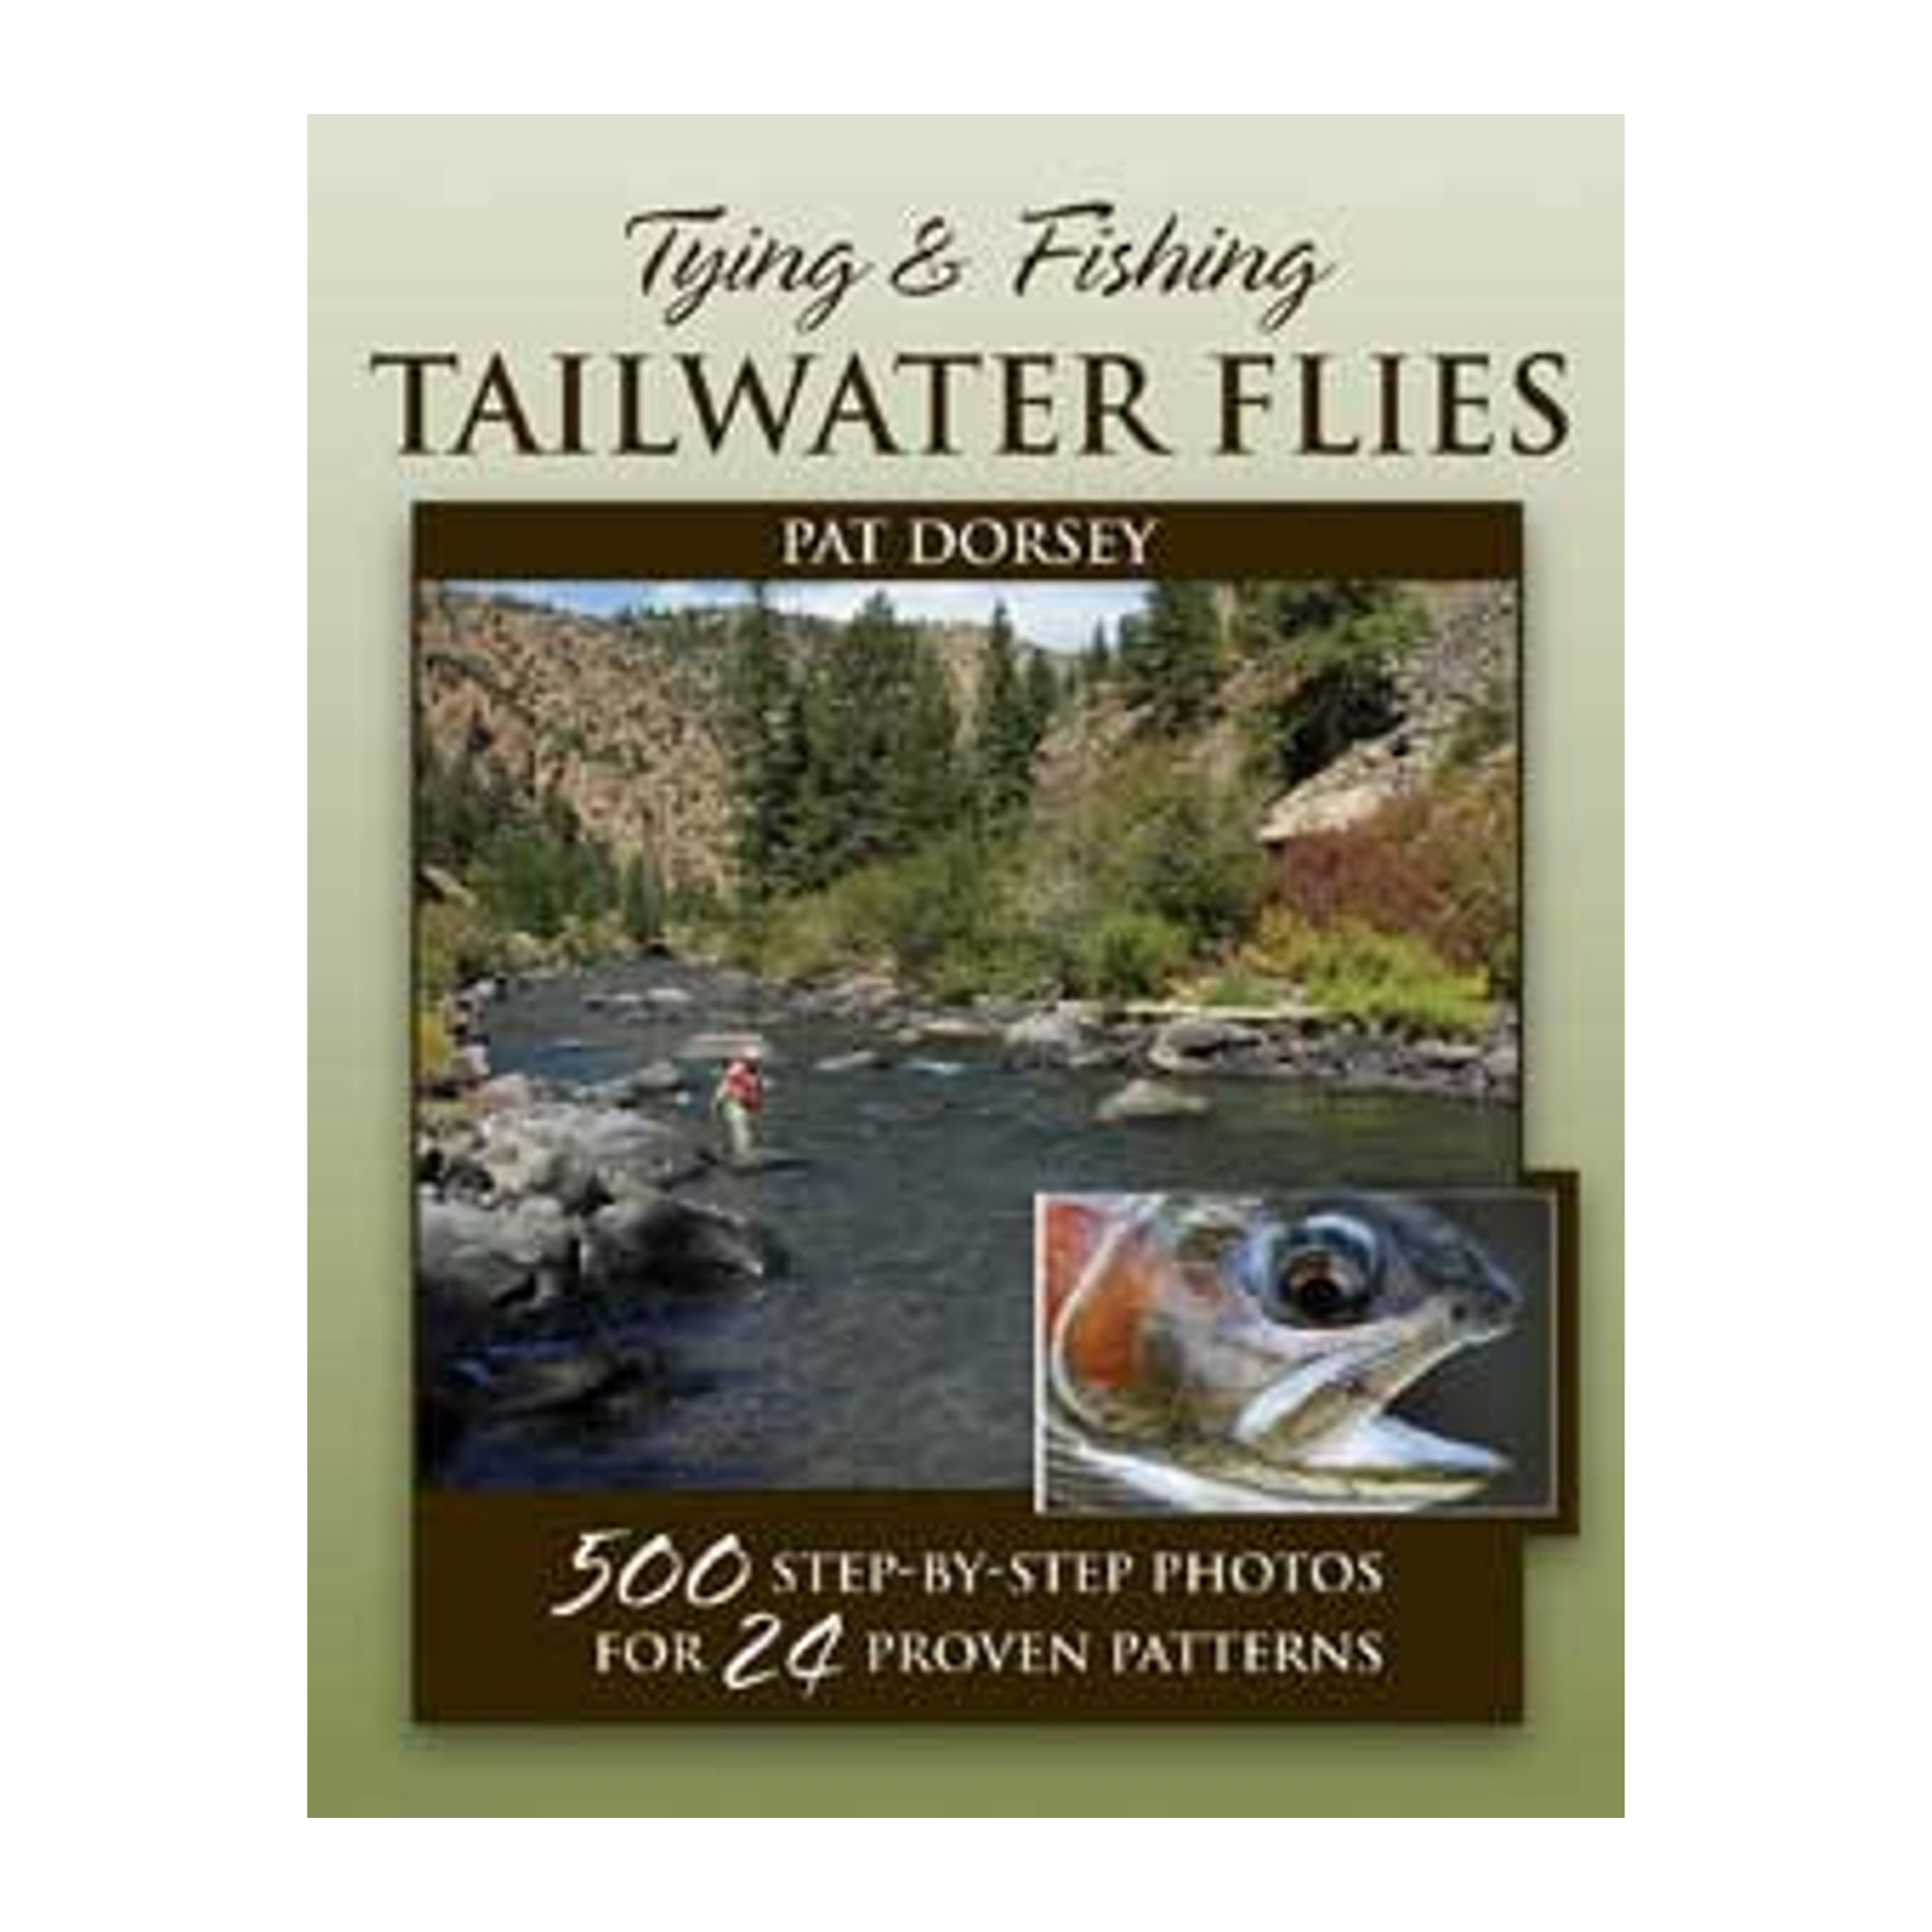 Tying and Fishing Tailwater Flie: 500 Step-by-Step Photos for 24 Proven Patterns [Book]